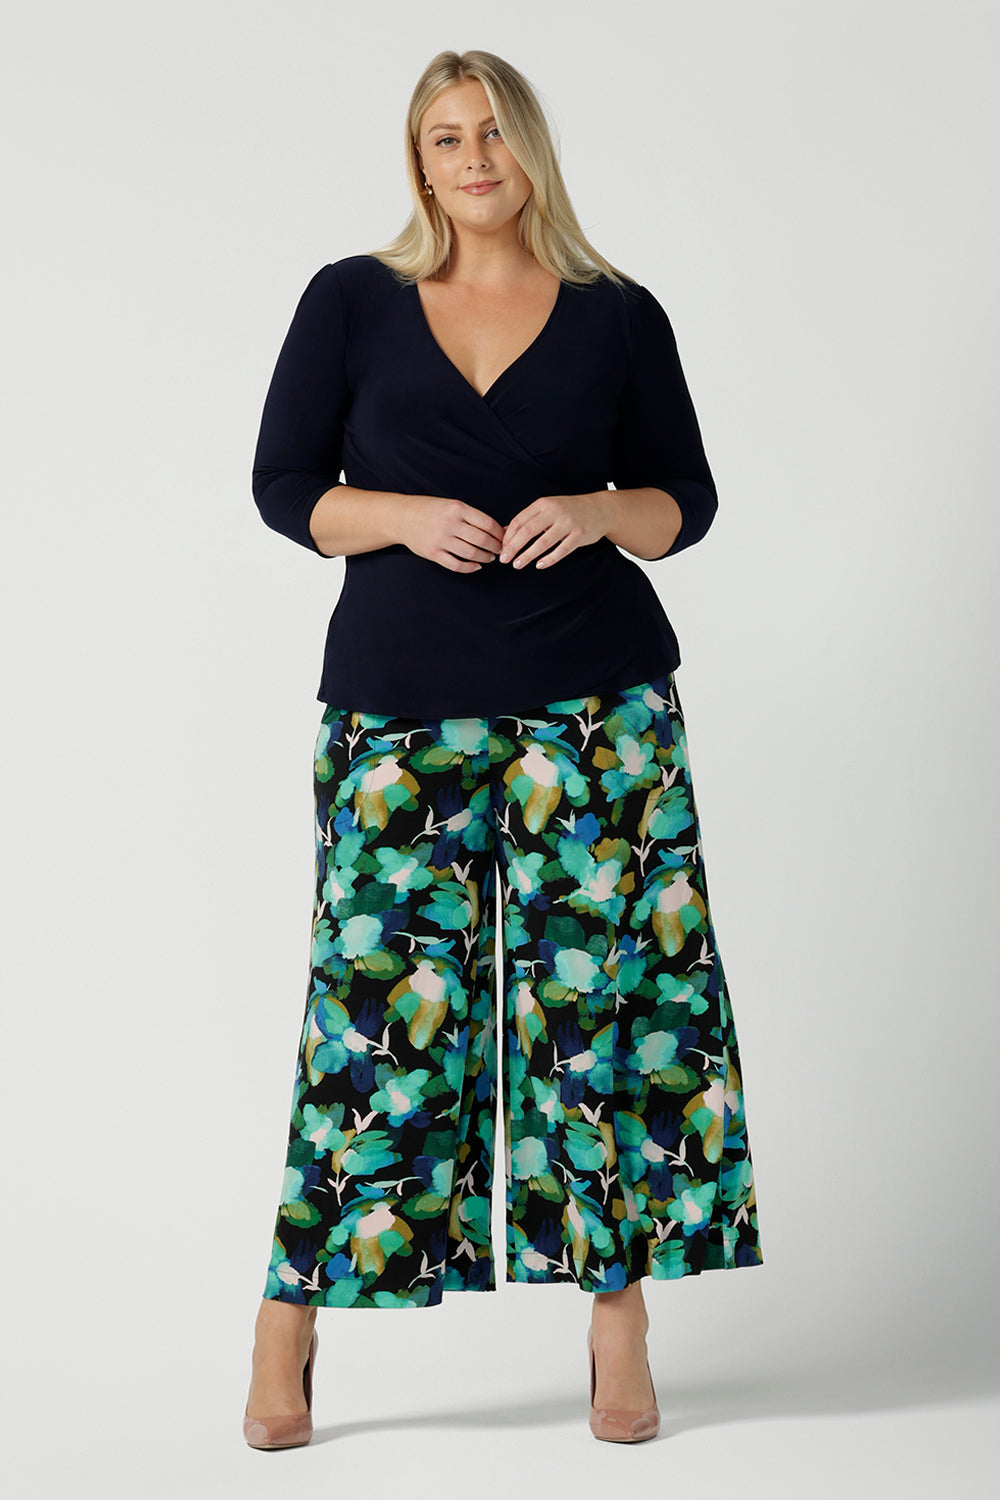 Size 18 woman wears the Dany culotte in Canopy, a full leg culotte with a canopy print. A bold green colour splatter print. Styled back with pink heels and a navy wrap top. Made in Australia for women size 8 - 24. 